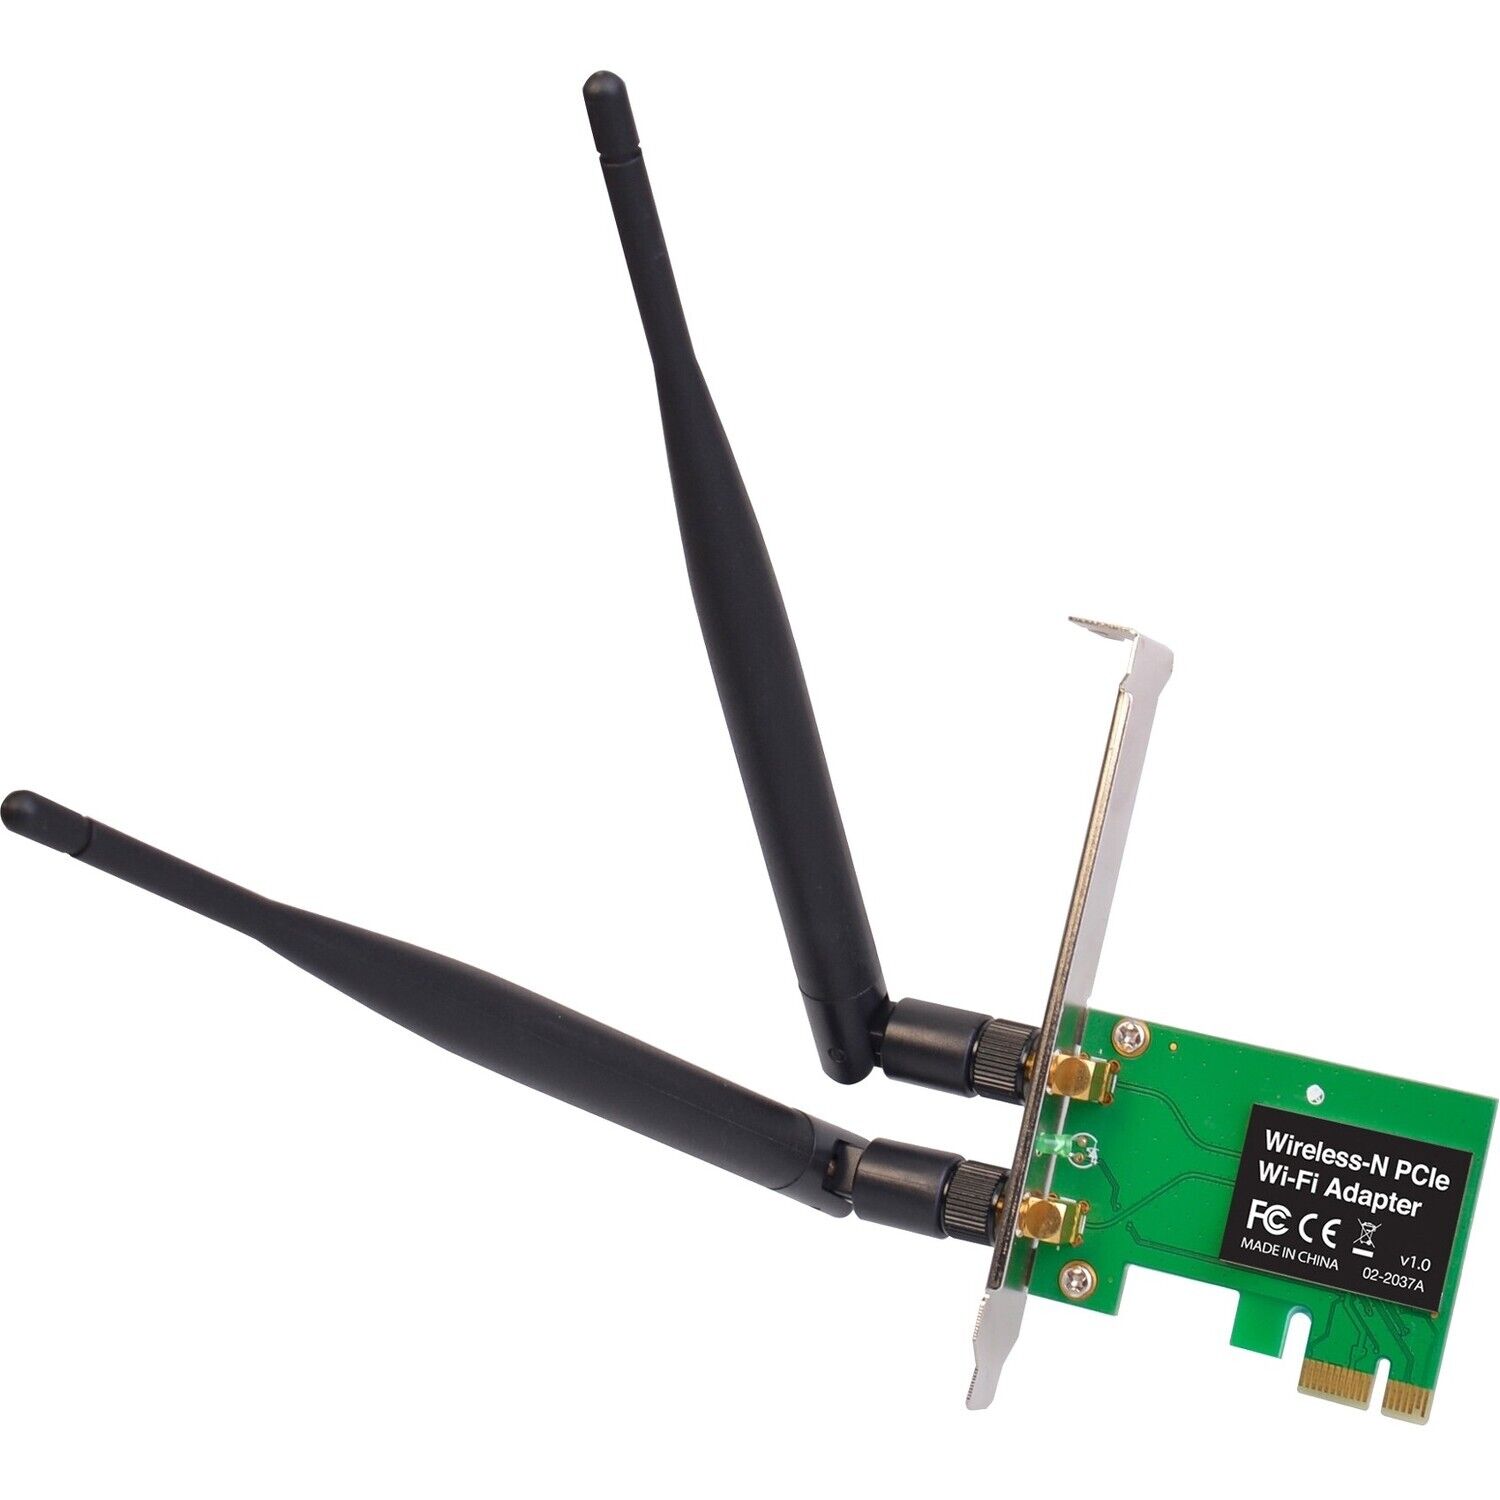 SIIG IEEE 802.11n - Wi-Fi Adapter for Desktop Computer (cn-wr0811-s2)